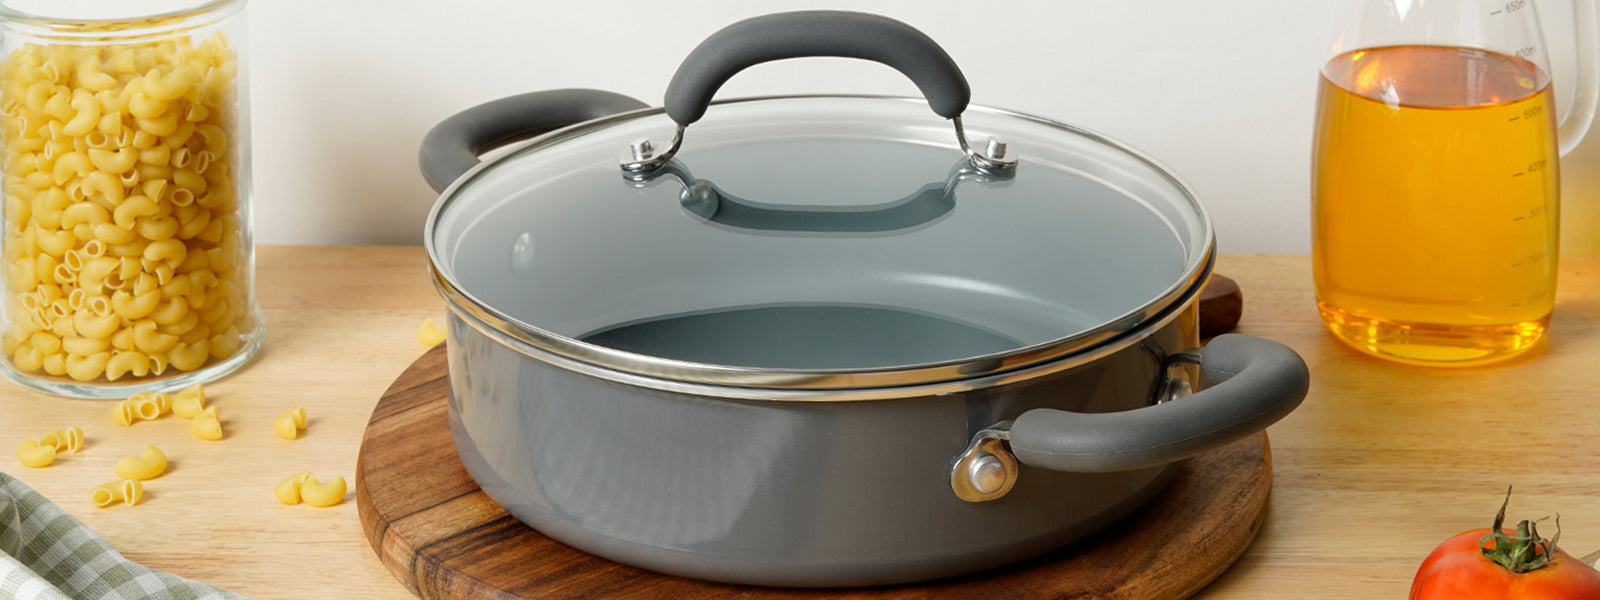 3 Best Healthy Non-Toxic Cookware Sets (2022 Reviews